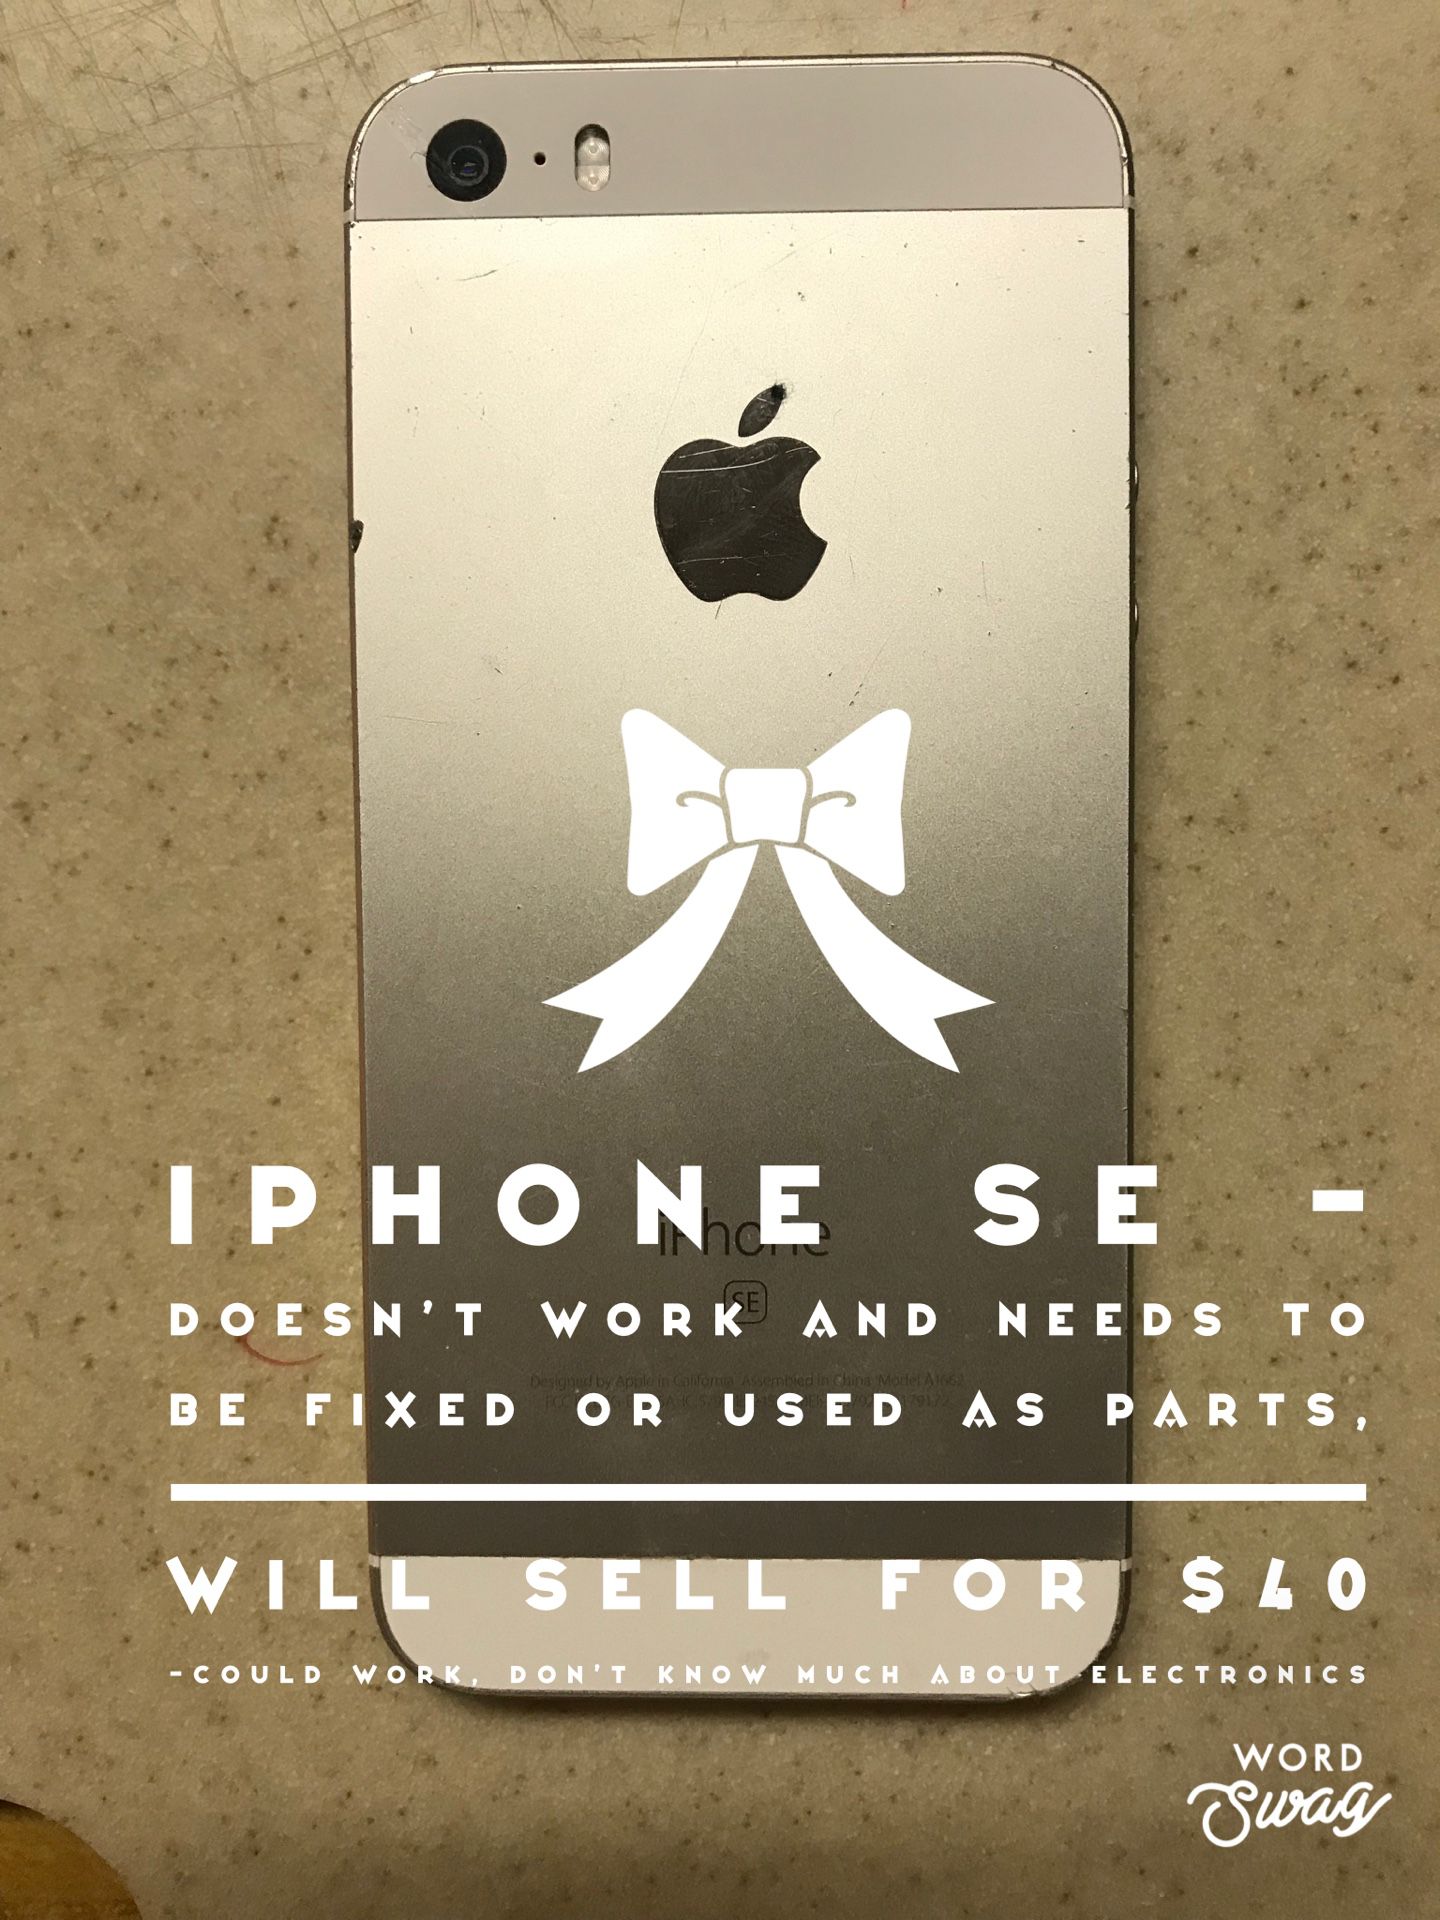 White iPhone SE - Doesn’t Work and Can Possibly be Fixed (I Haven’t Tried Nor Know How!) or Used as Parts - CHEAP** $25!